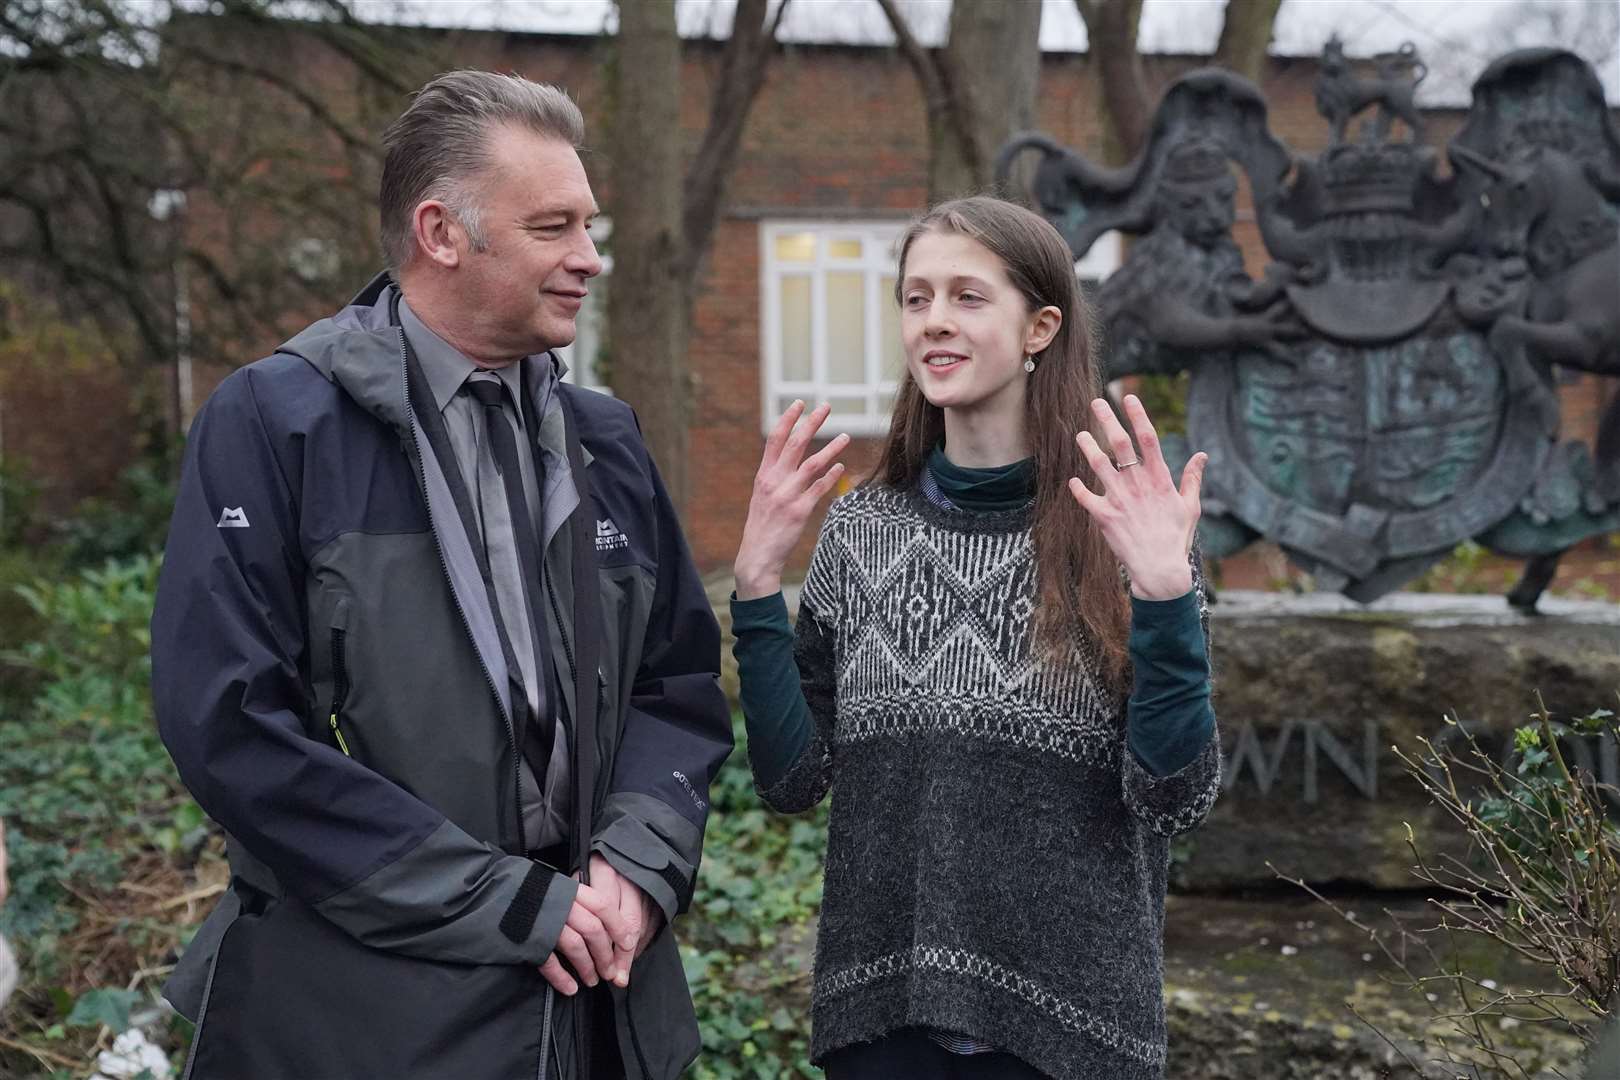 BBC presenter Chris Packham with Cressida Gethin outside Isleworth Crown Court, west London, ahead of her trial (Jonathan Brady/PA)